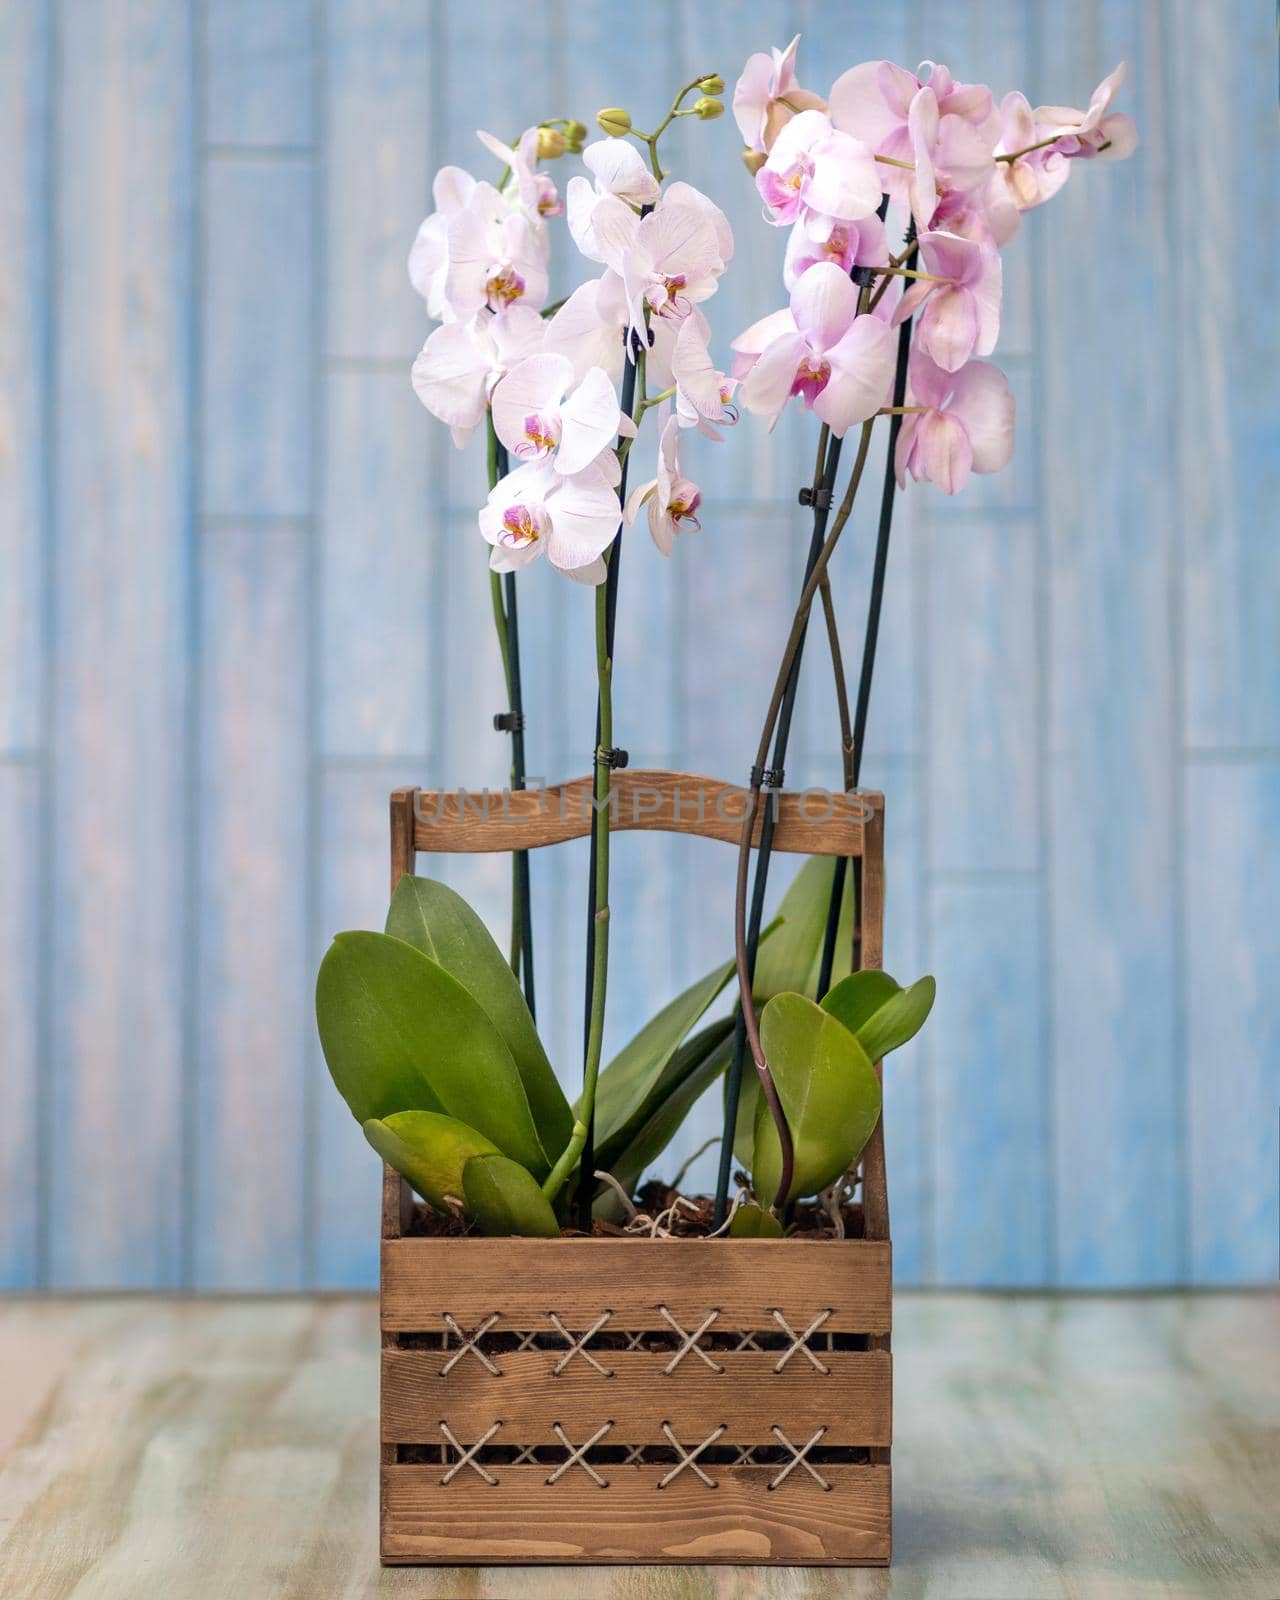 Phalaenopsist moth orchid in the wooden box by ferhad